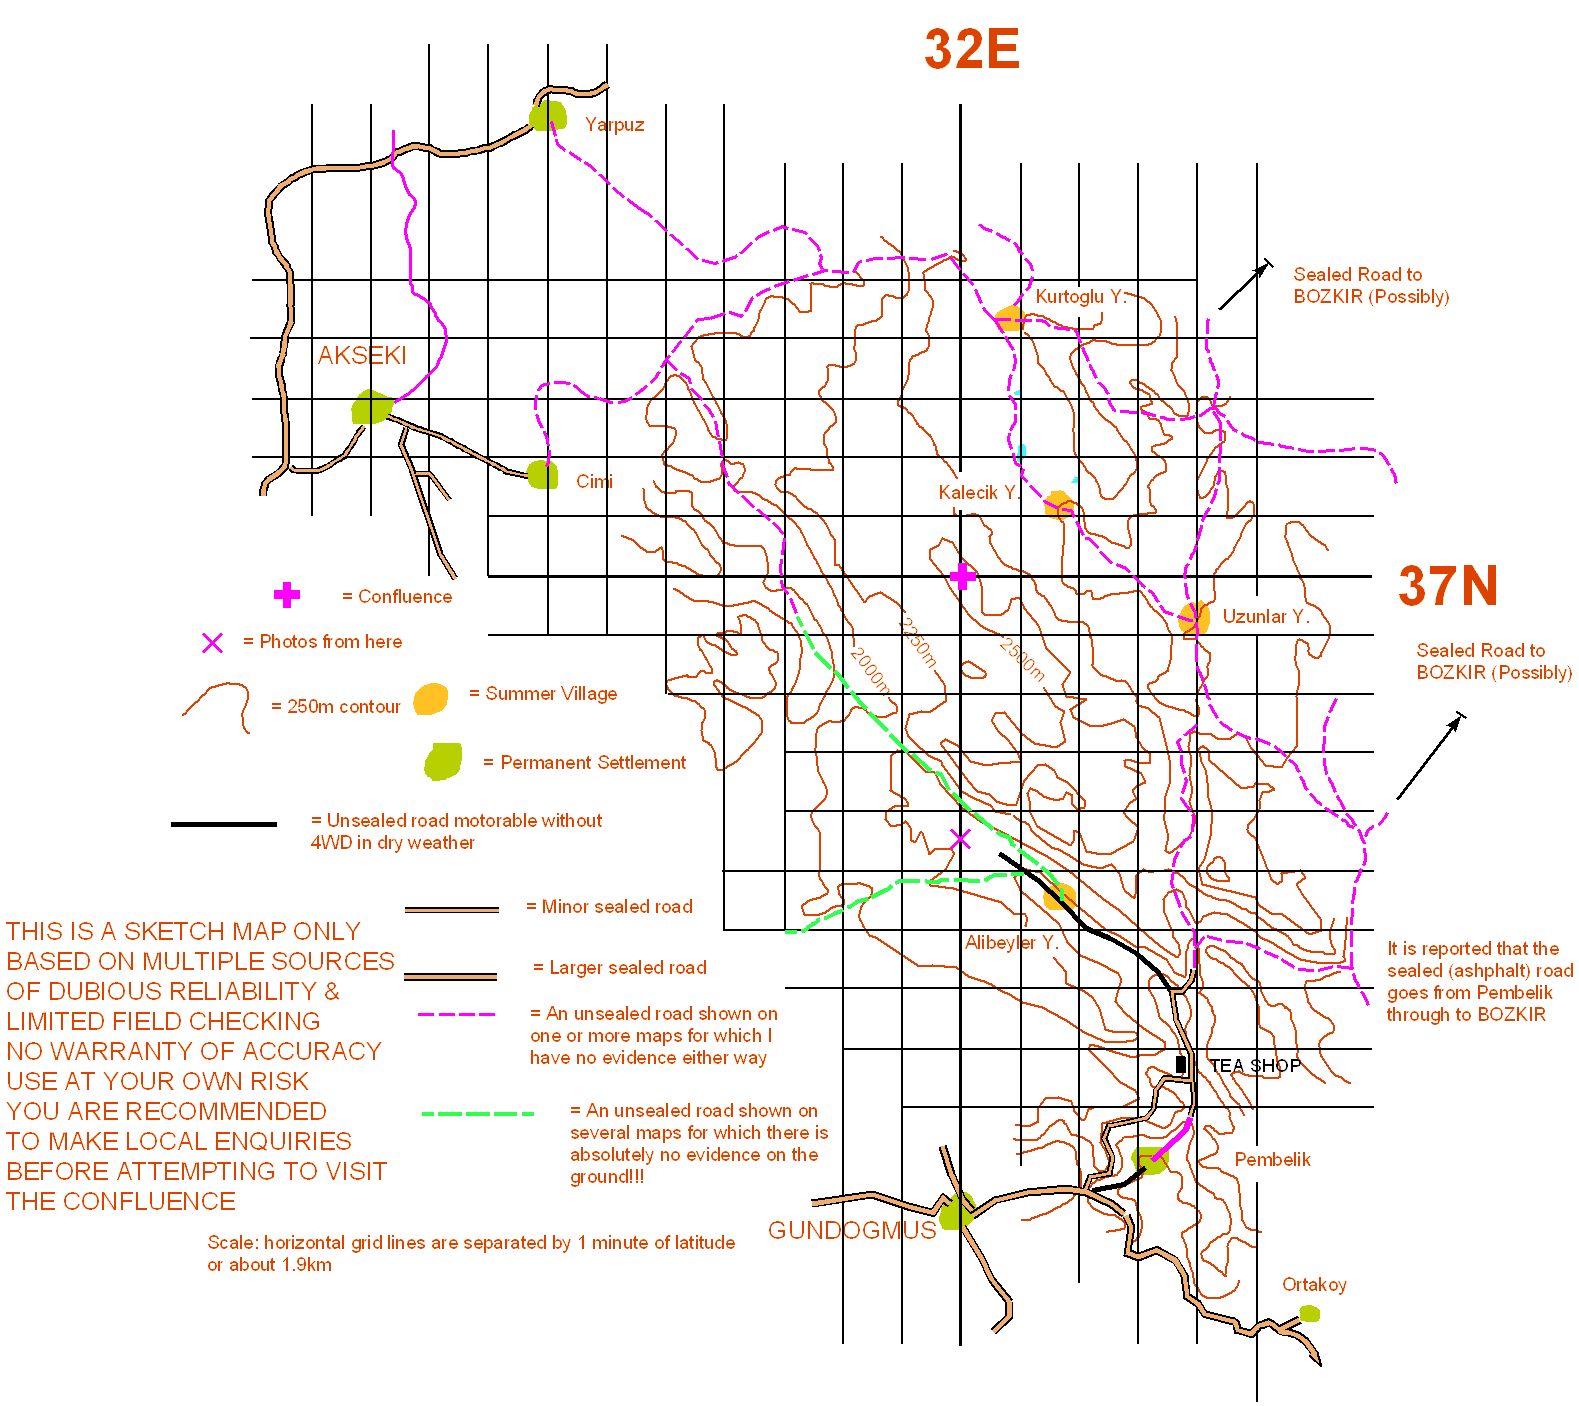 Sketch map to assist future attempts